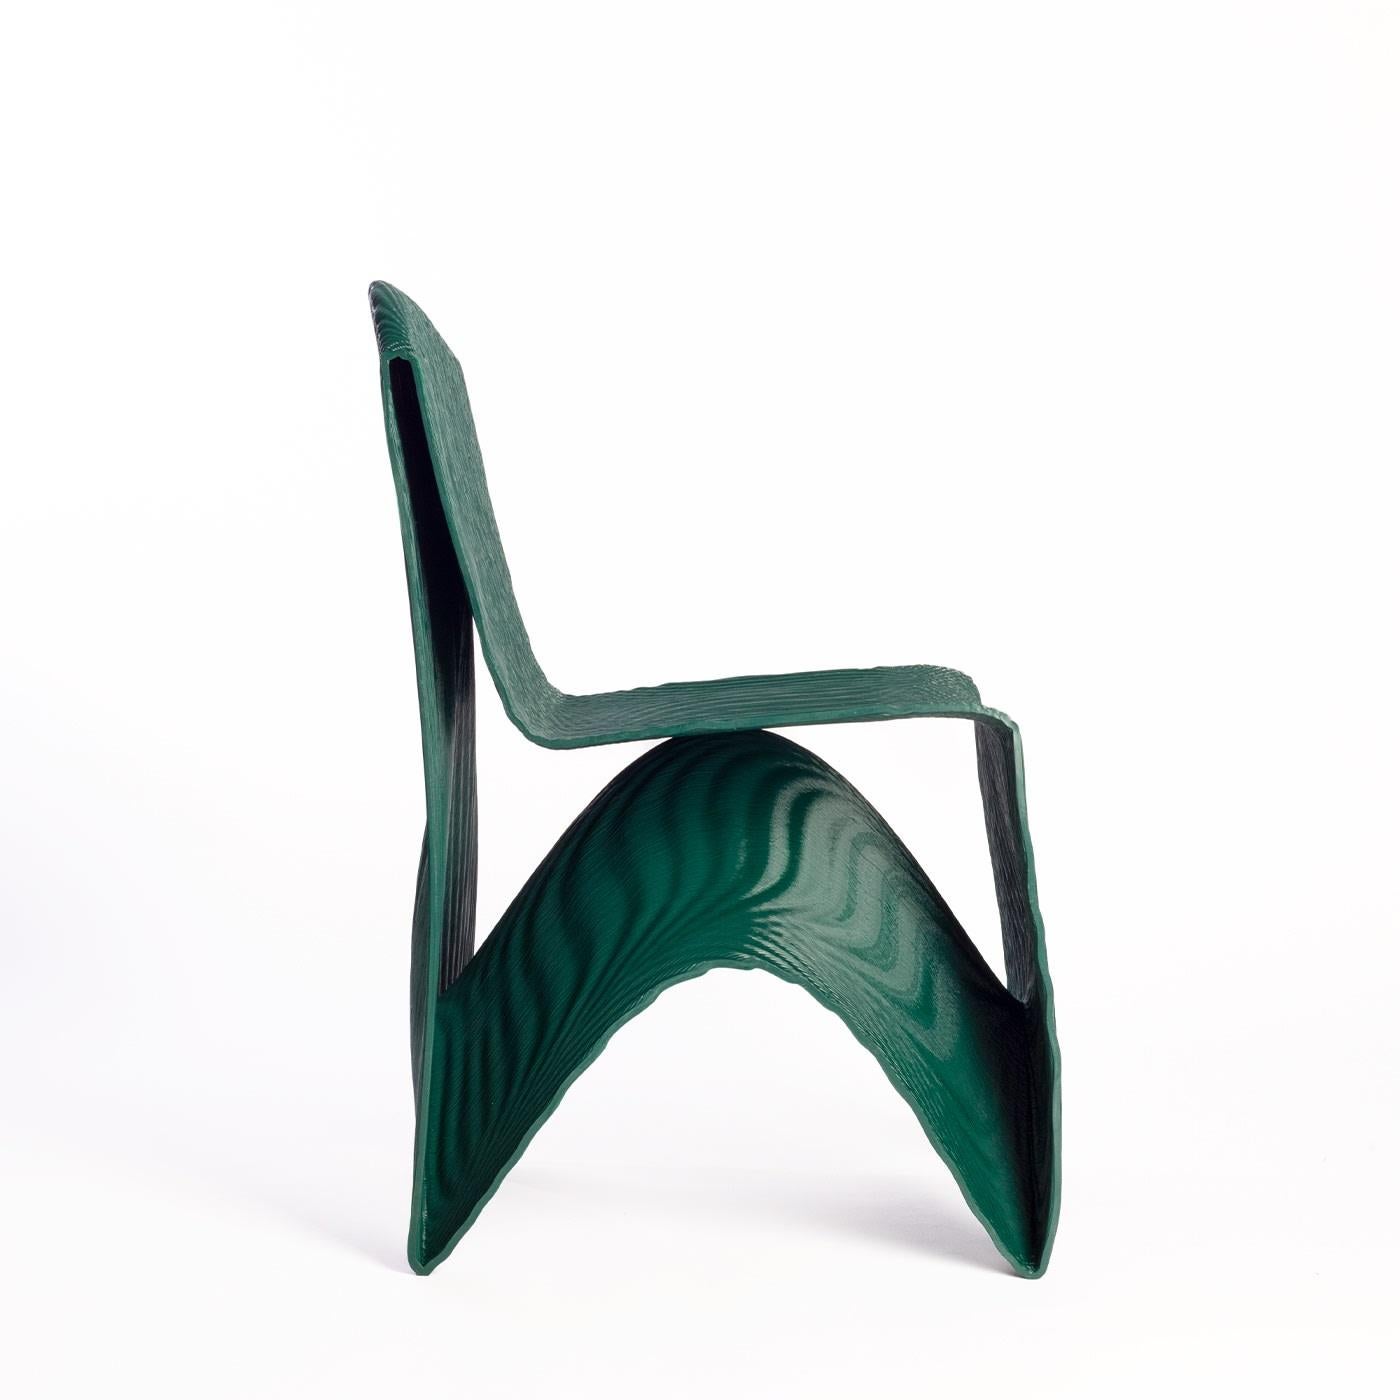 Santorini is a chair that combines lightness and aesthetics. Made by Medaarch in 2020, it conforms like a body of continuous material. The 3D printed seat in PETG or PLA is well suited to both indoor and natural settings. Santorini has a design that